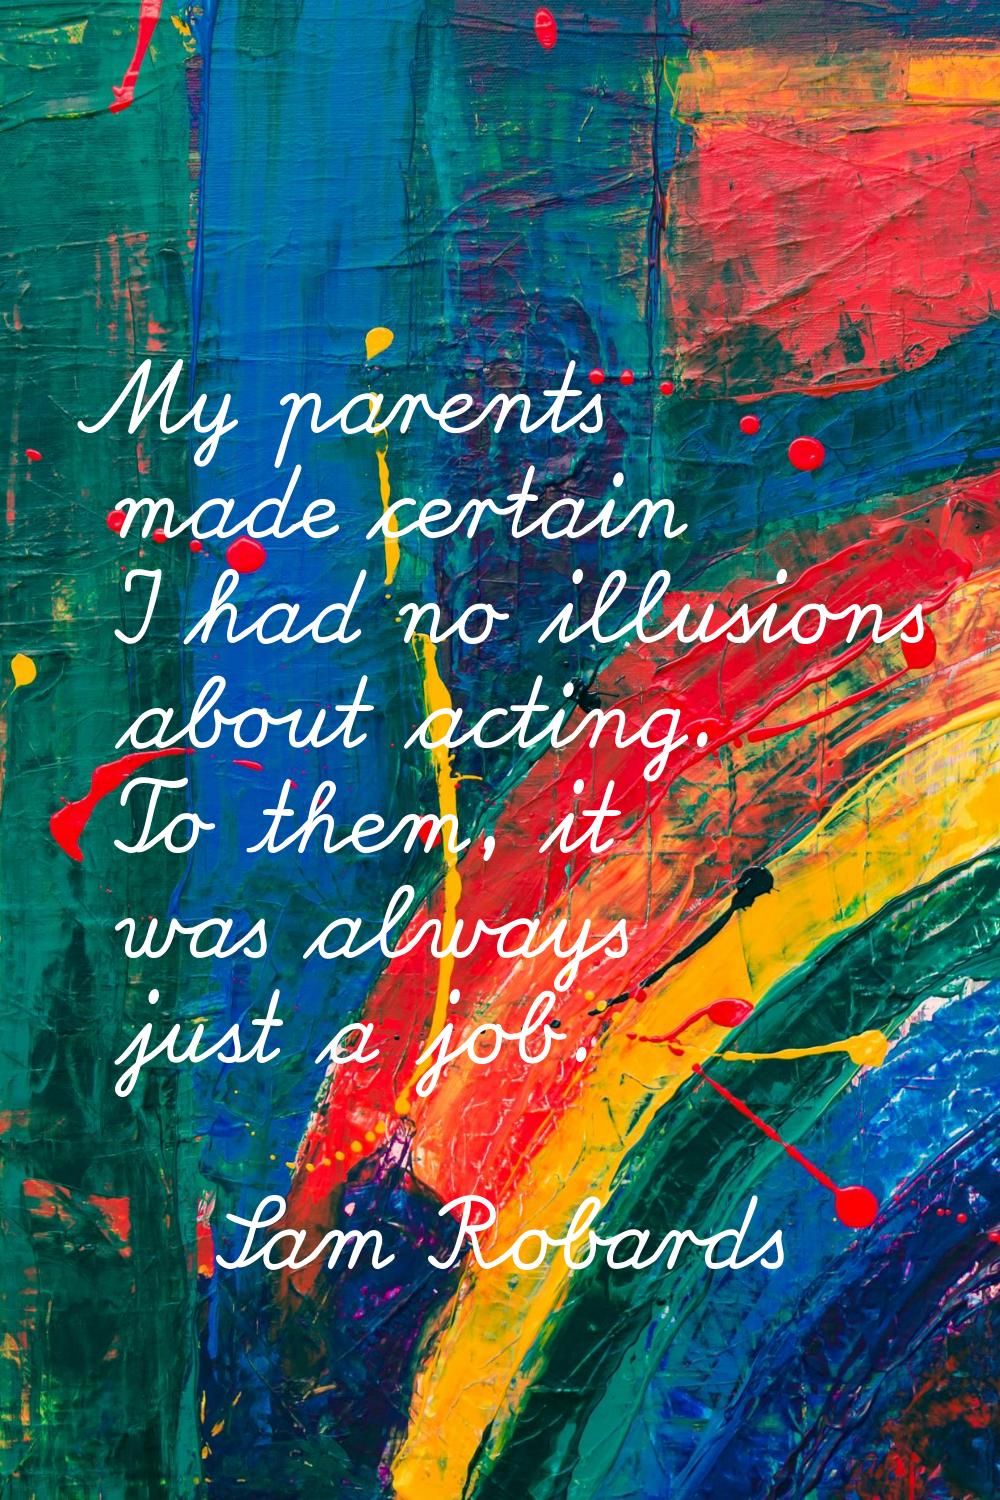 My parents made certain I had no illusions about acting. To them, it was always just a job.